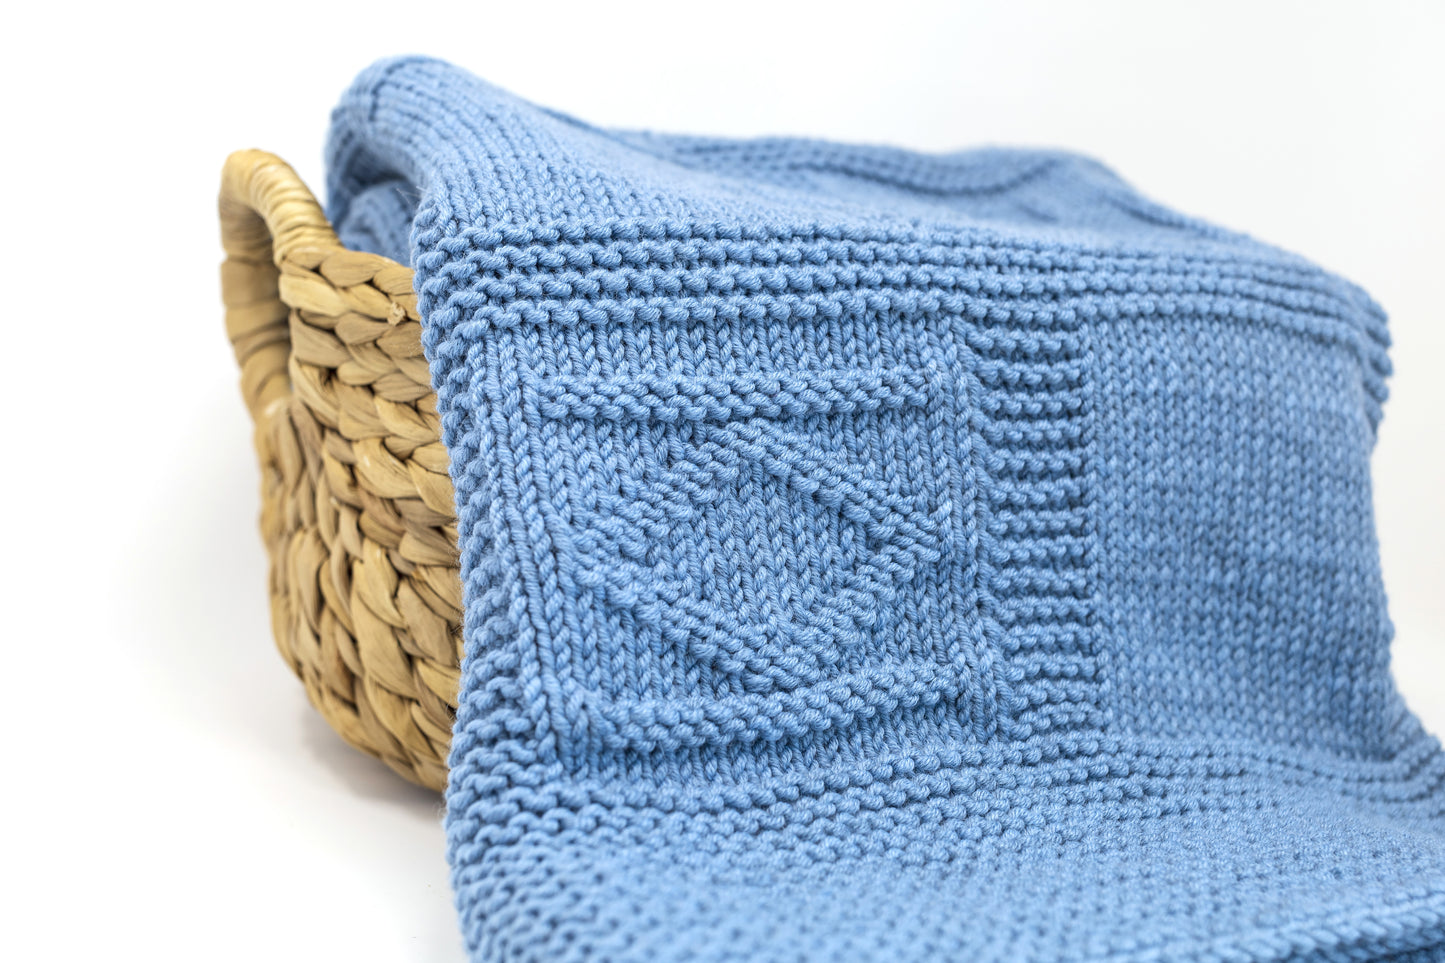 close up for blue merino wool hand-knitted baby blanket in geometric knitting pattern